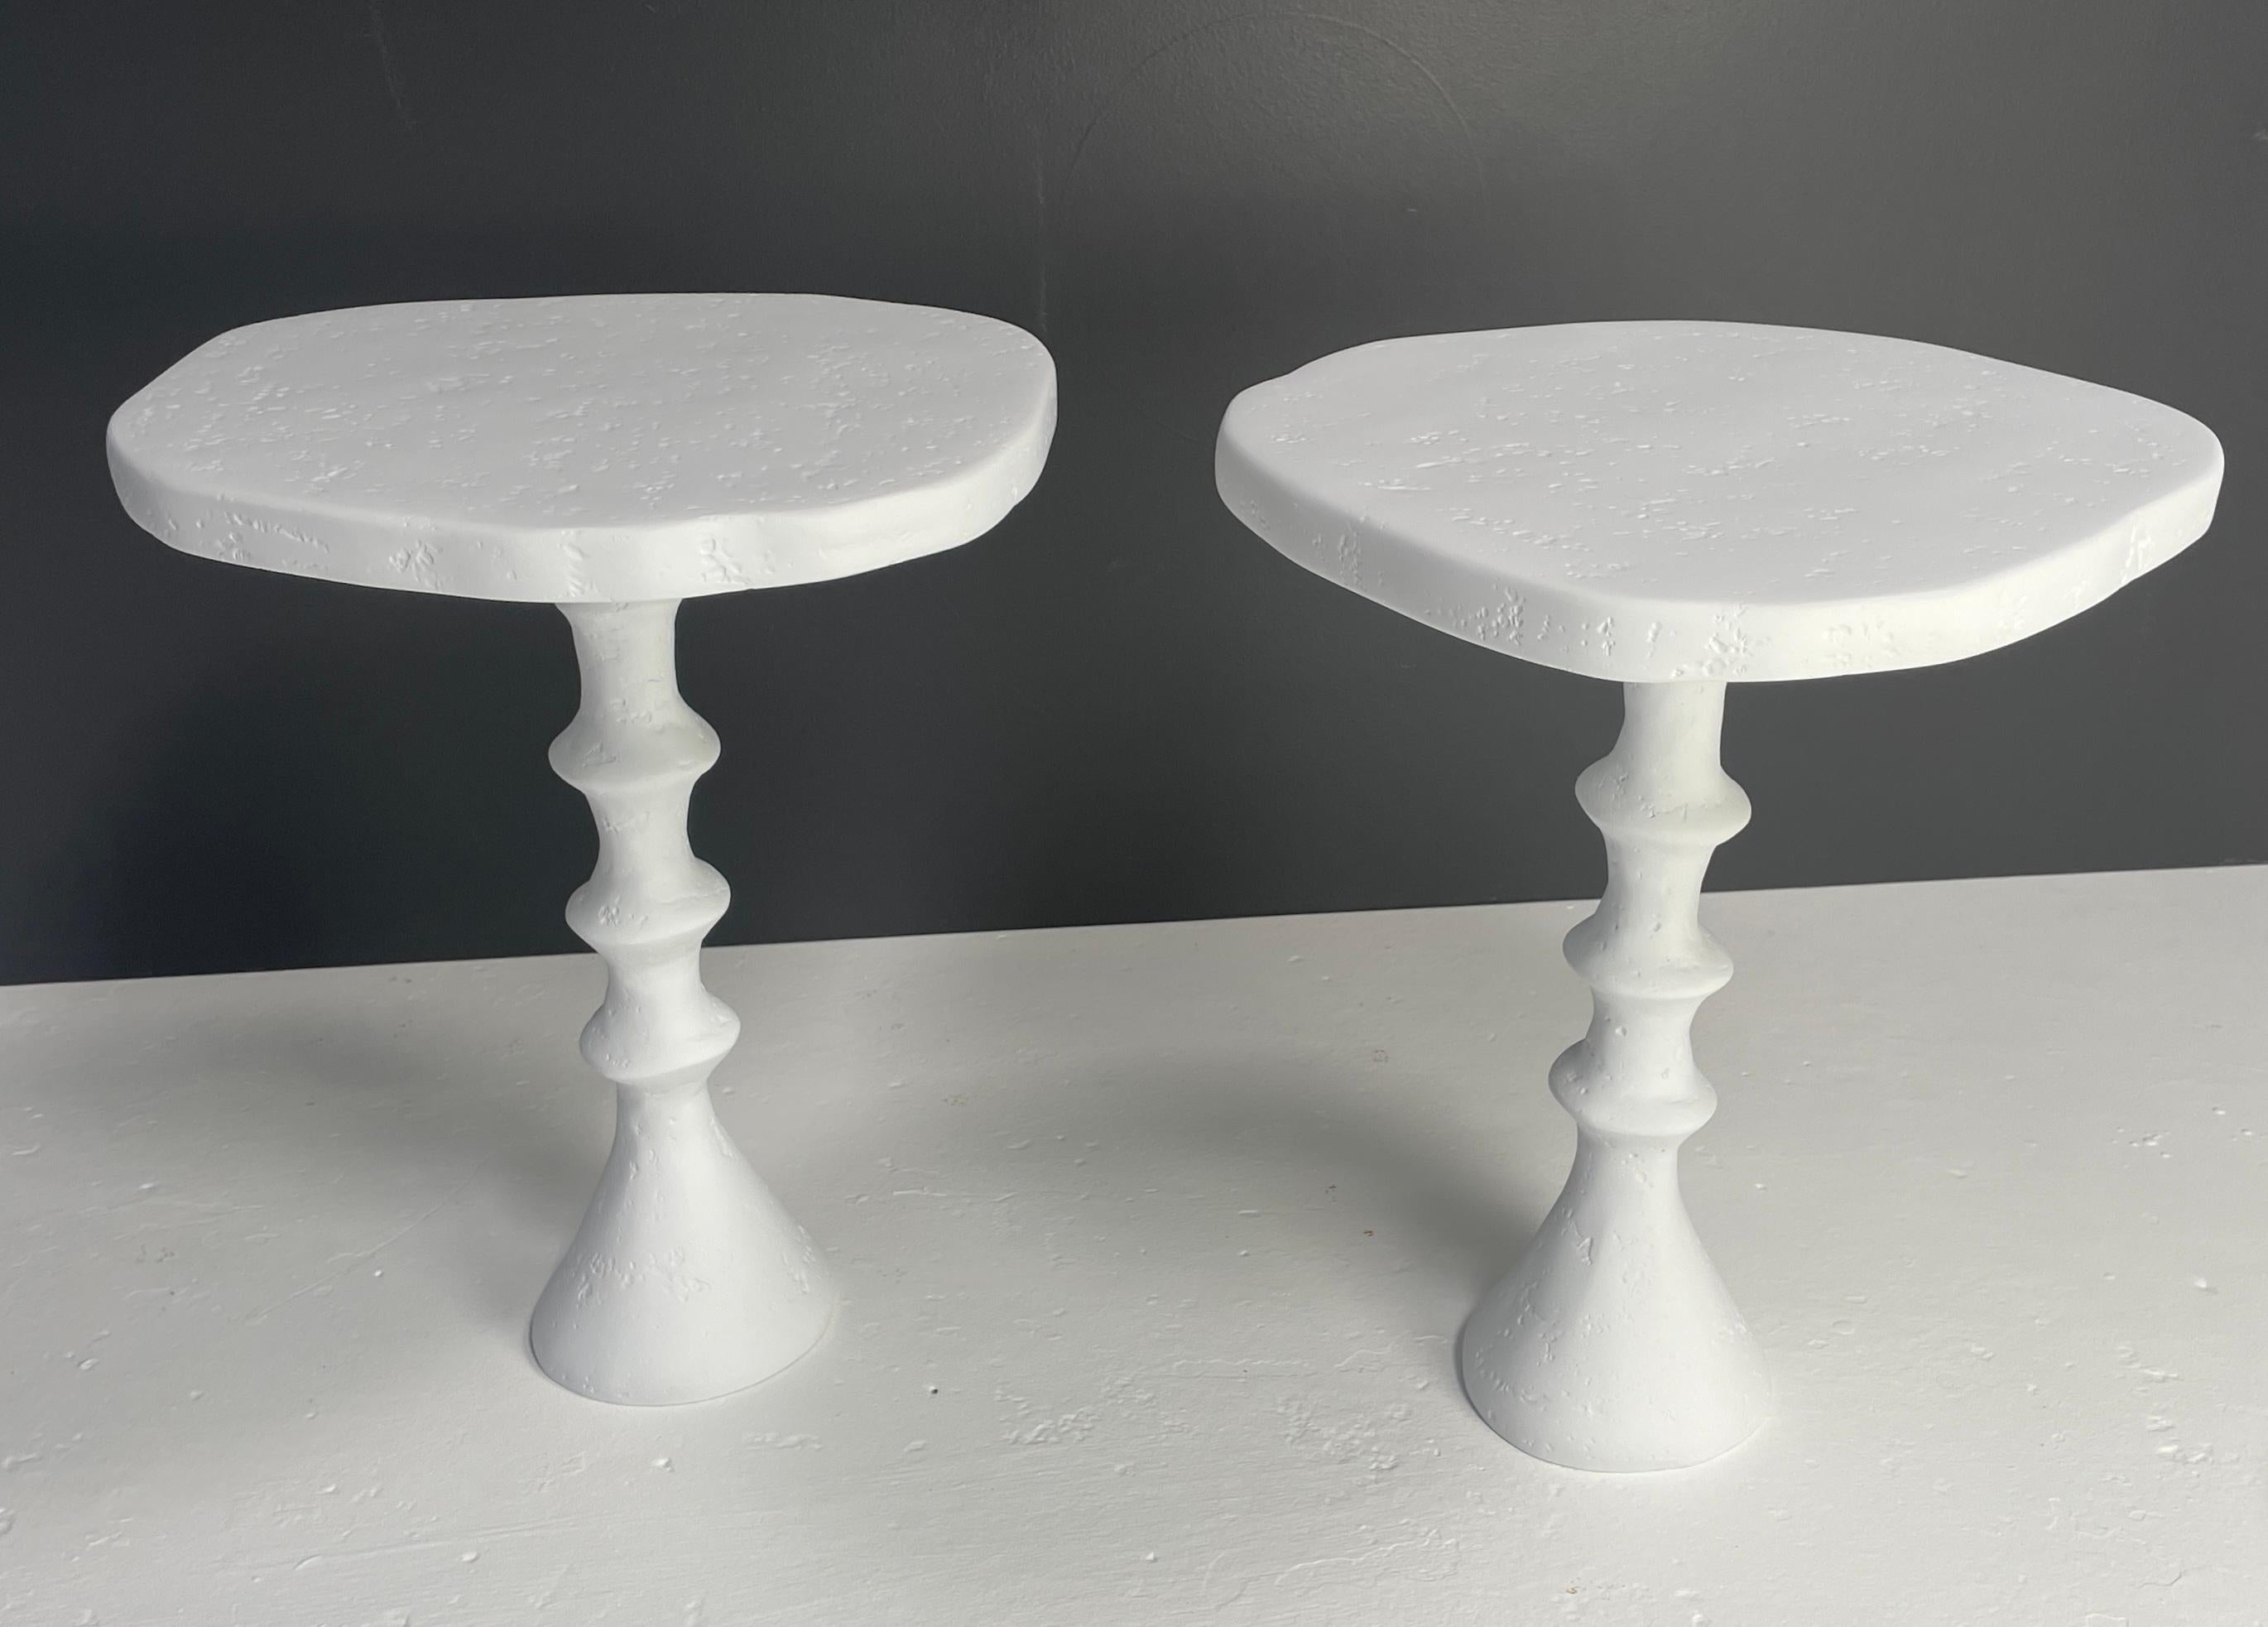 Pair of St Paul Plaster Side Table by Bourgeois Boheme Atelier 'Petit Modèle' In New Condition For Sale In Los Angeles, CA